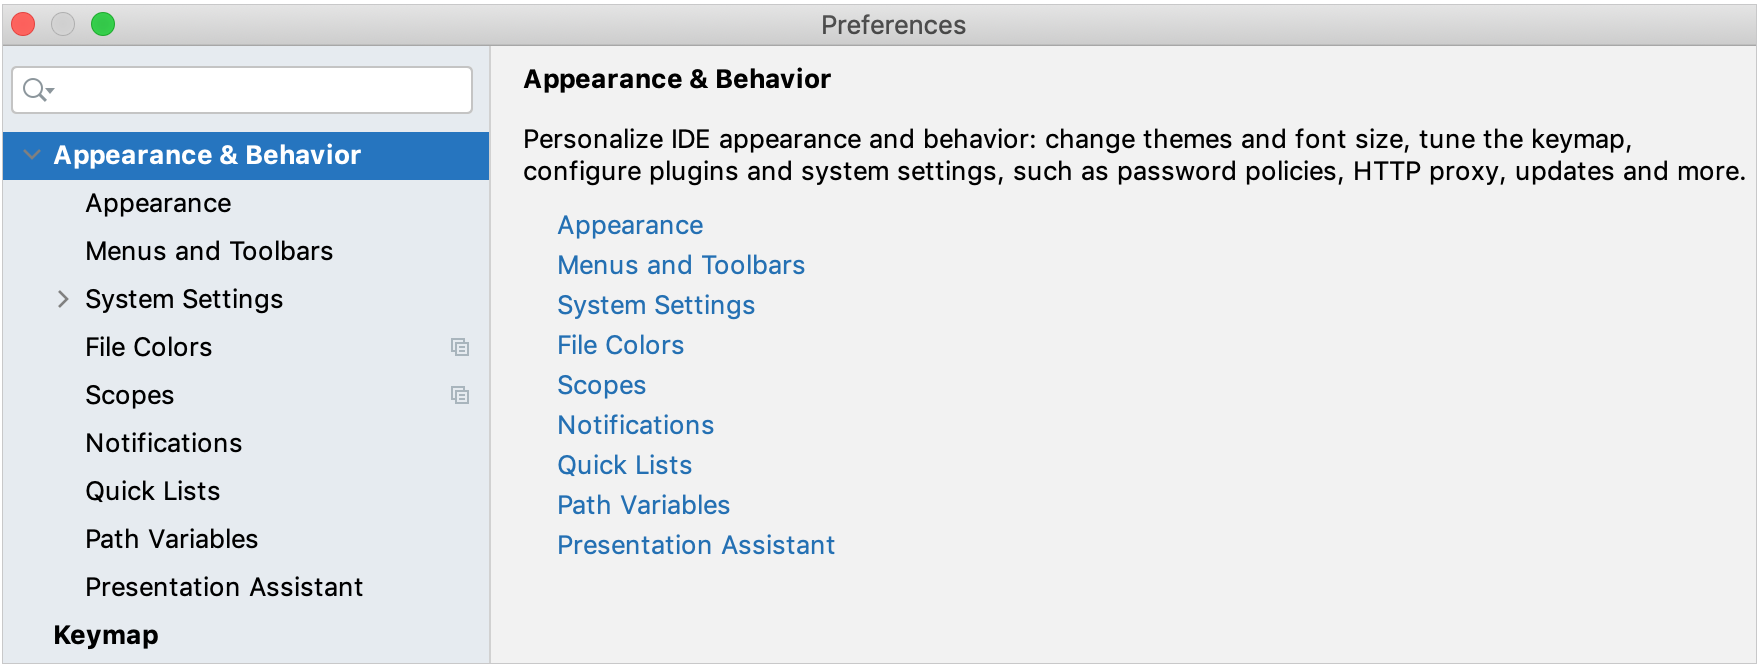 Appearance and Behavior